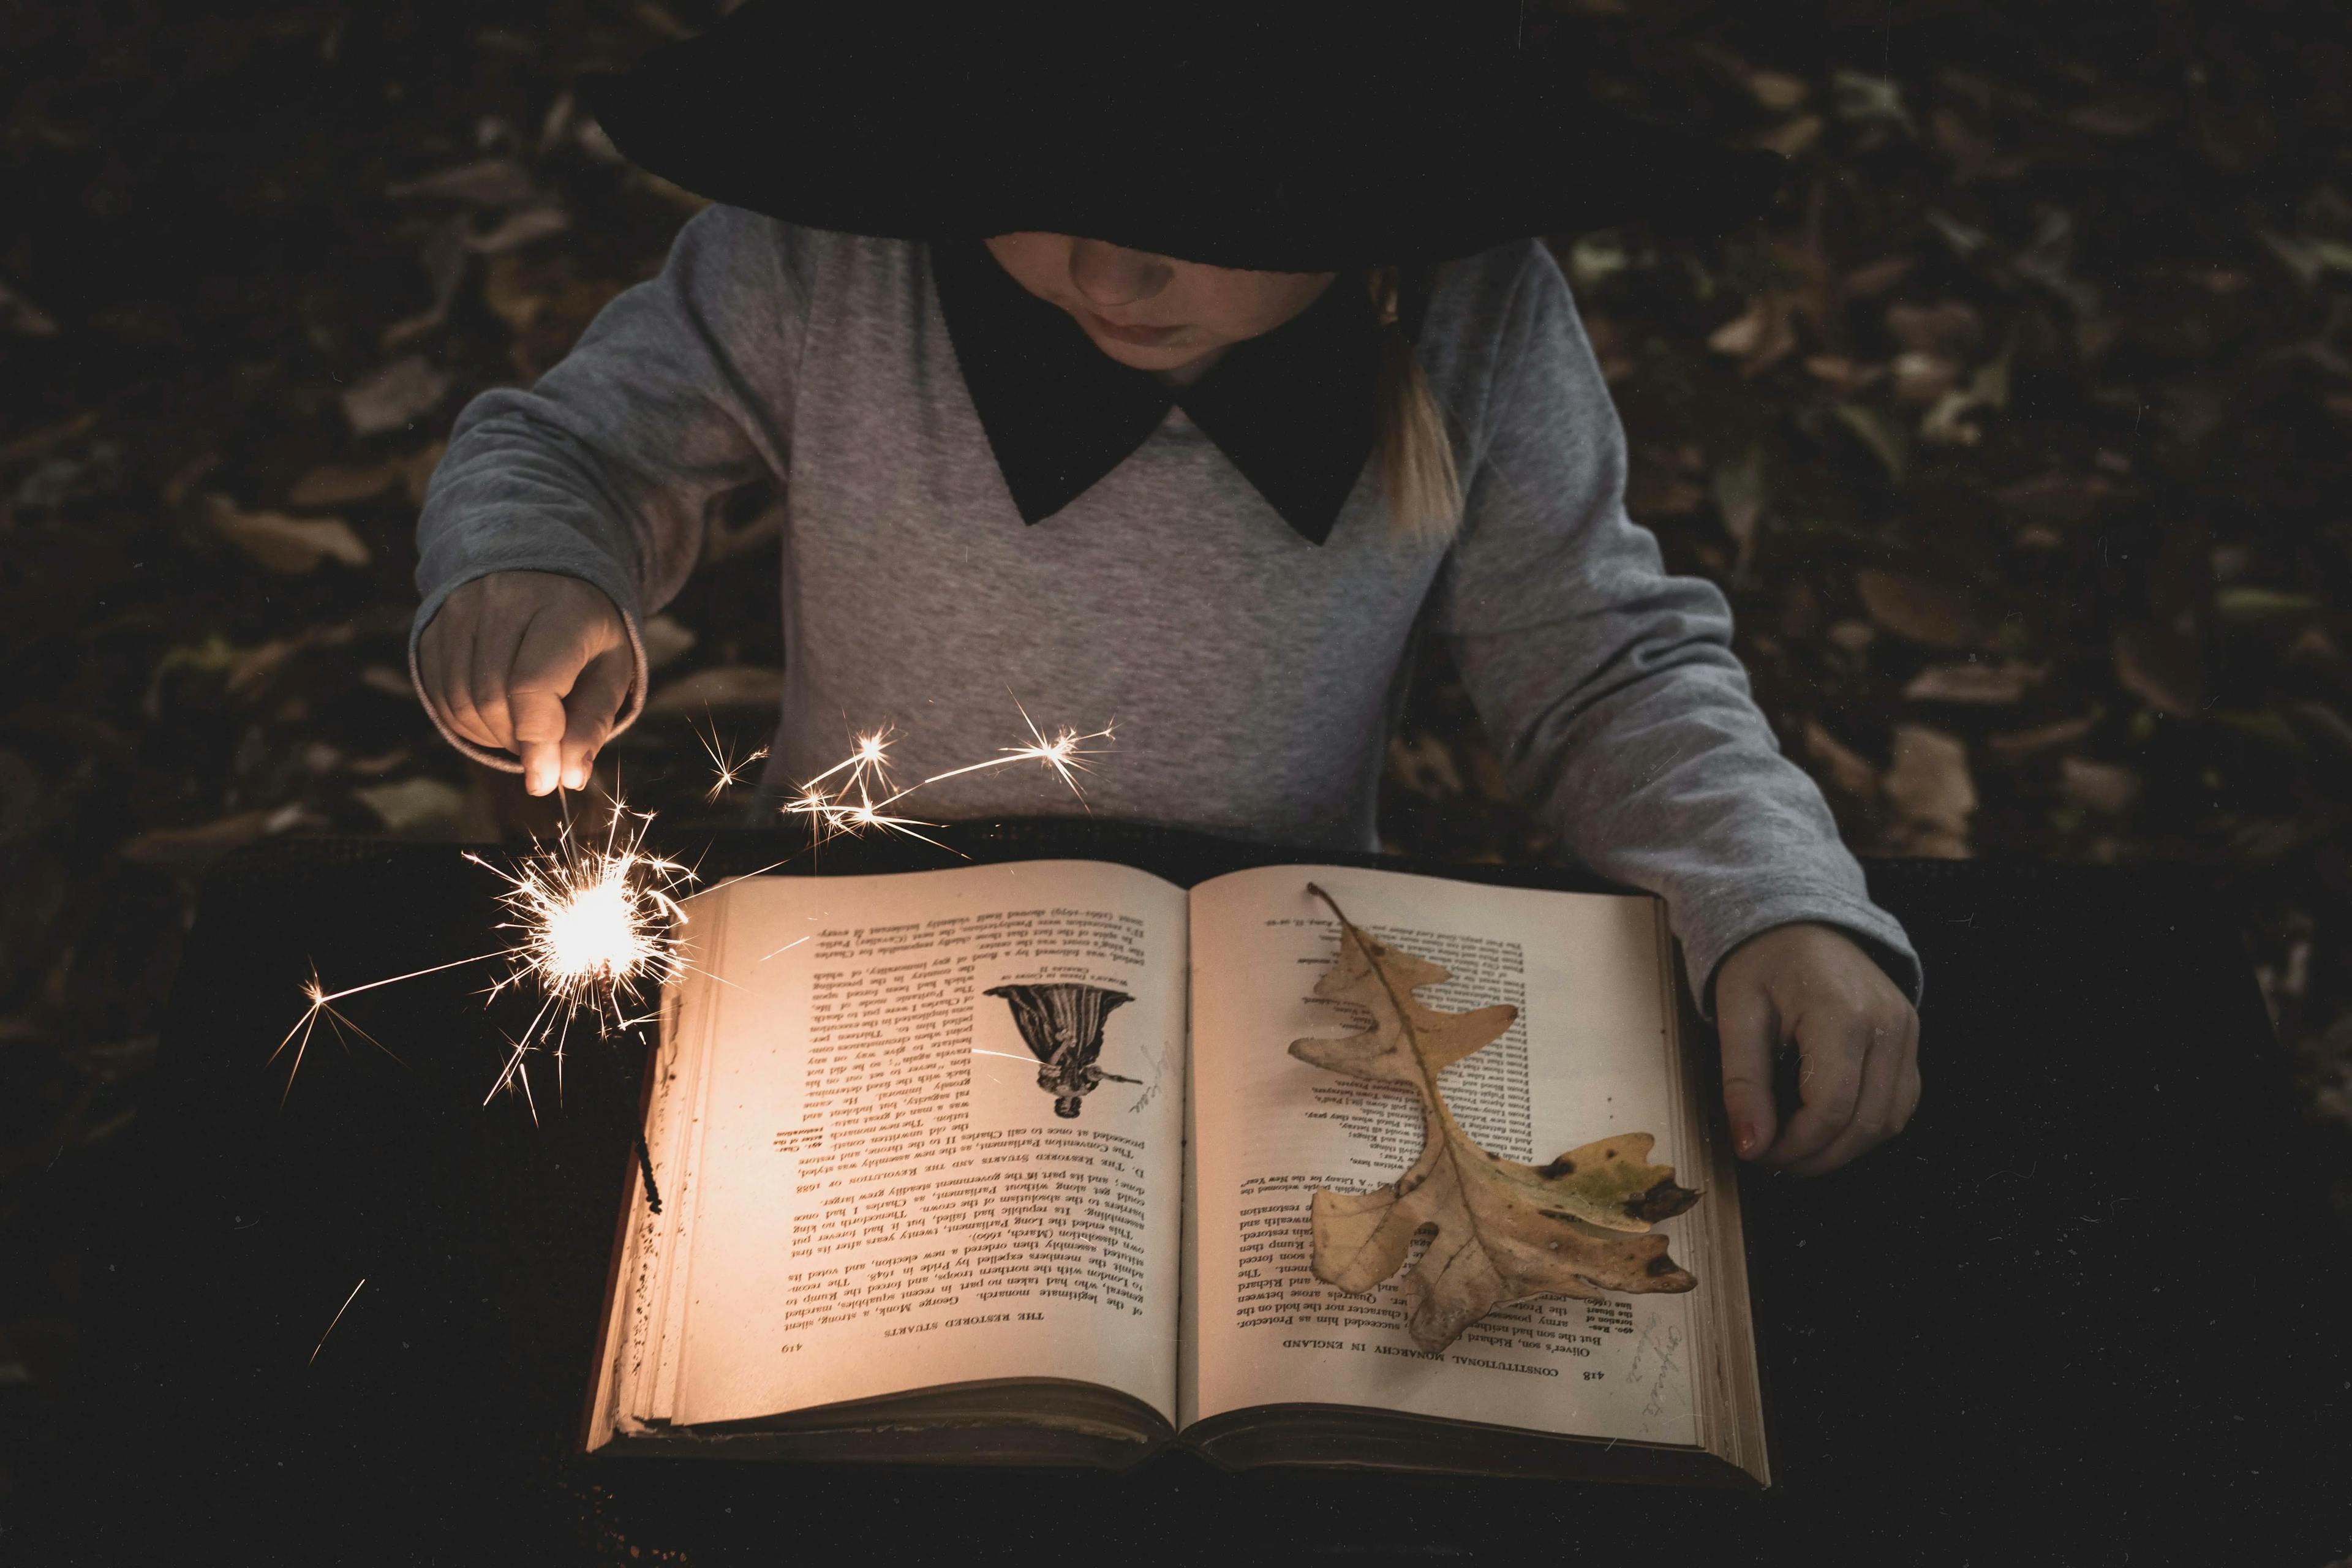 A girl in a witch costume sits in the foliage with a book and a sparkler in her hands